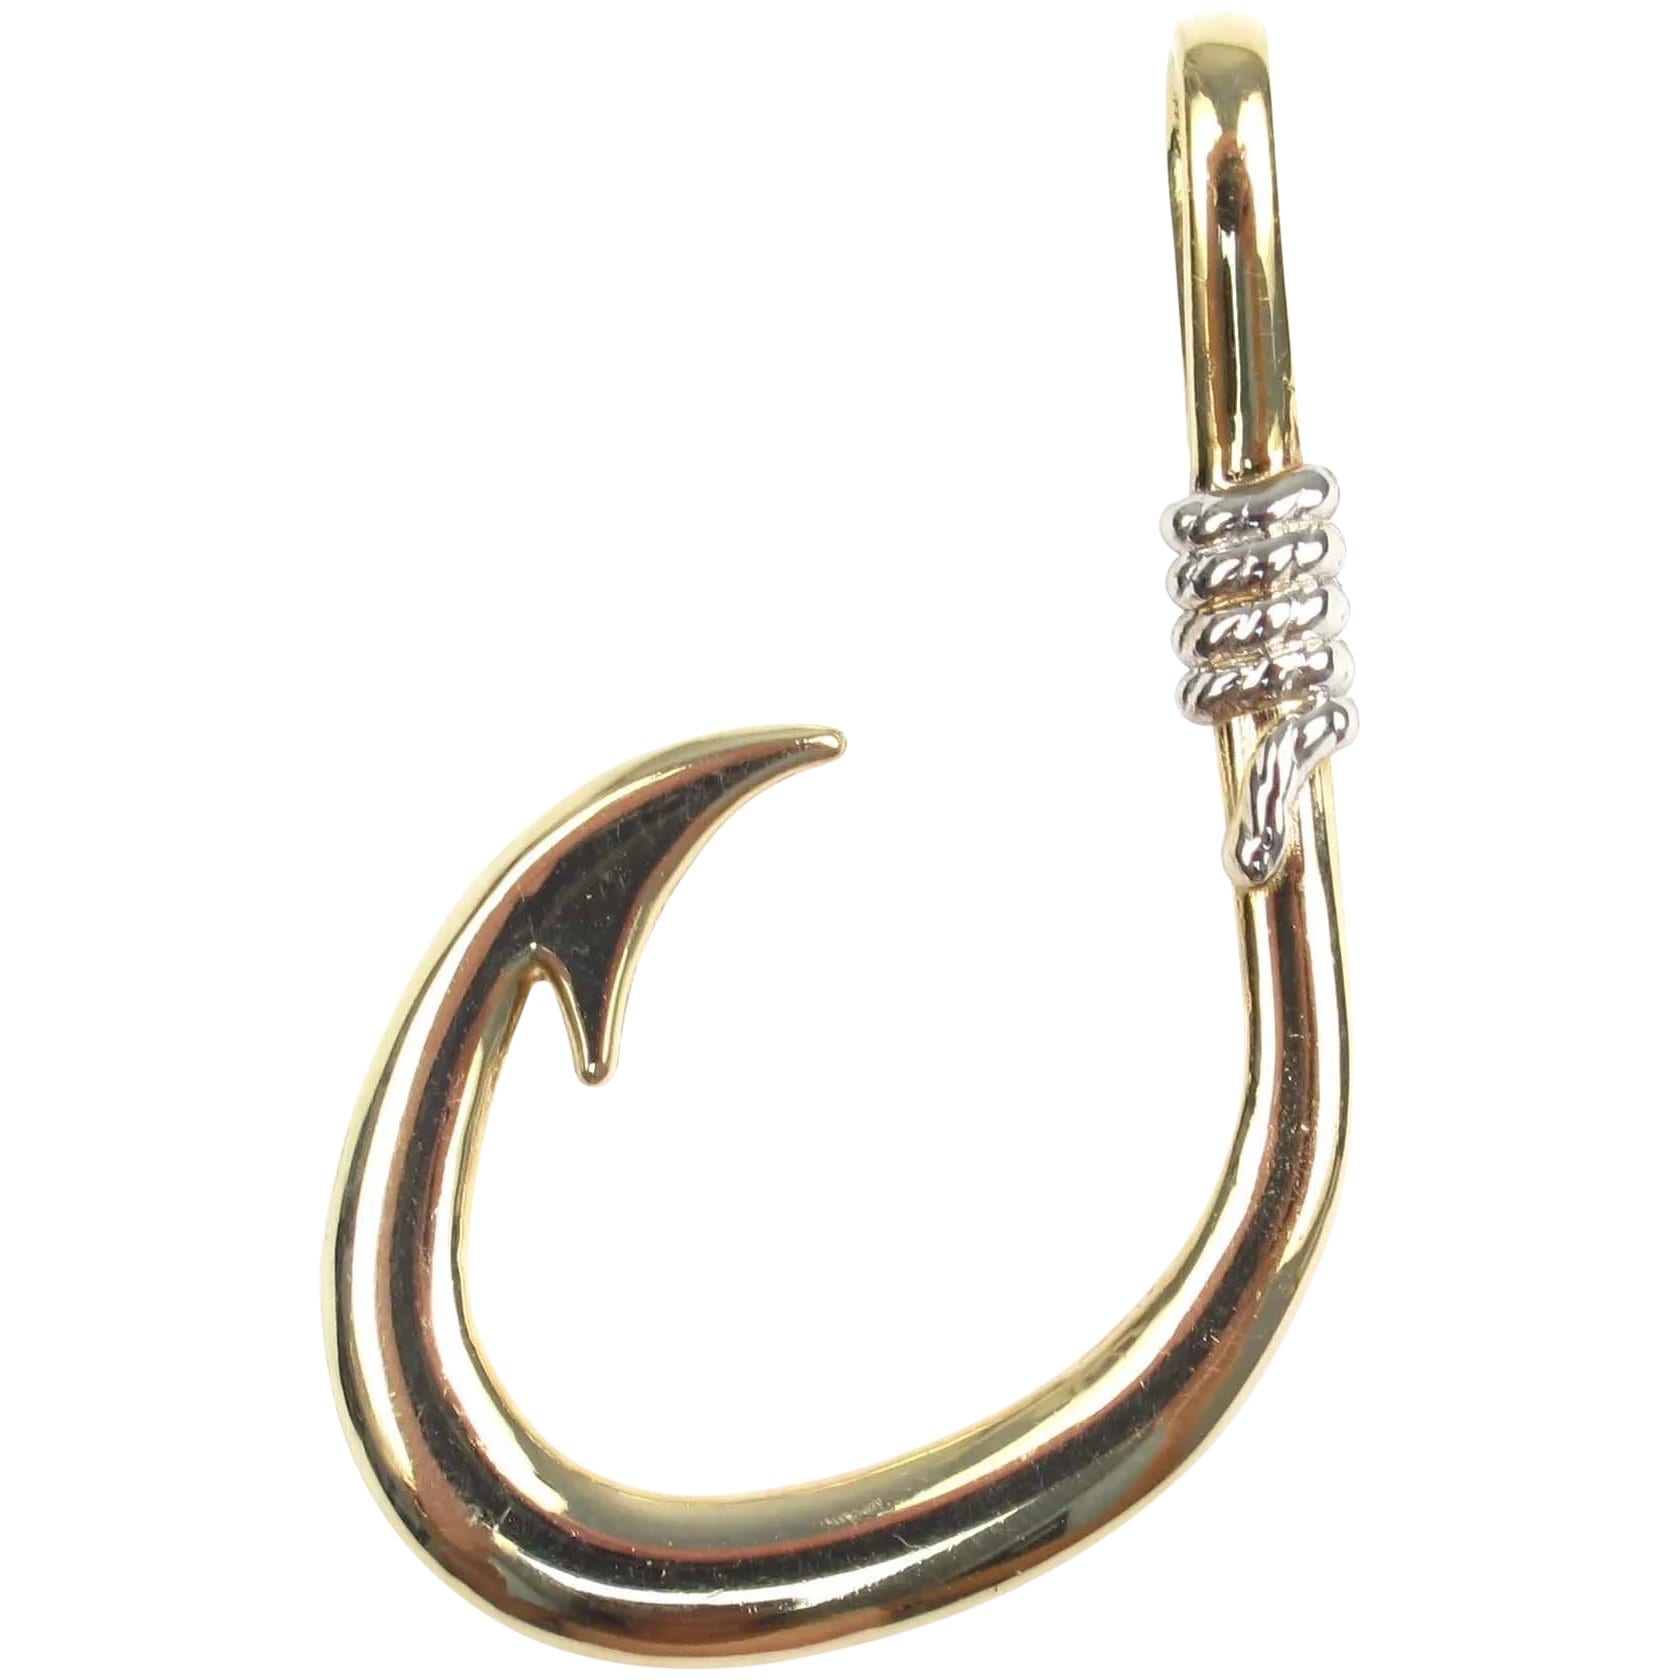 Fisherman's Fish Hook Tool Clip on Pendant Charm for Bracelet or Necklace